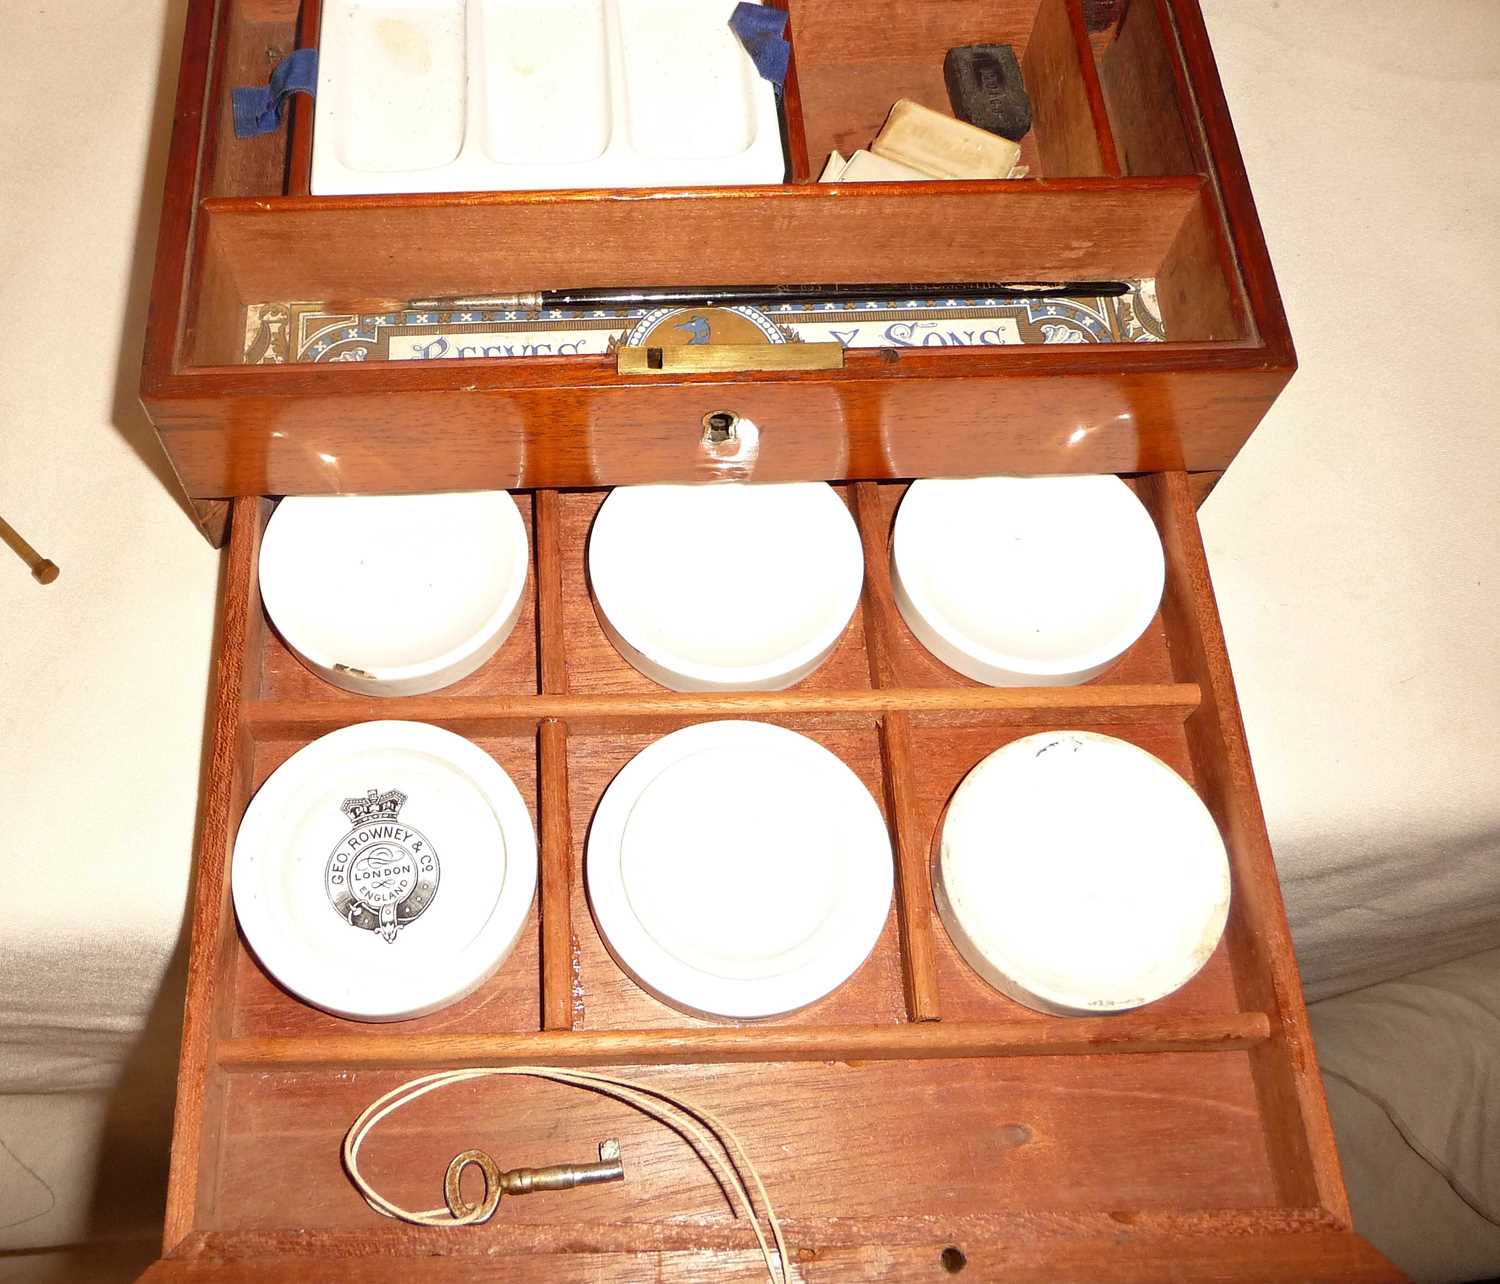 Reeves & Sons, Edwardian wooden watercolour paint box, with drawer under containing mixing palette - Image 2 of 8